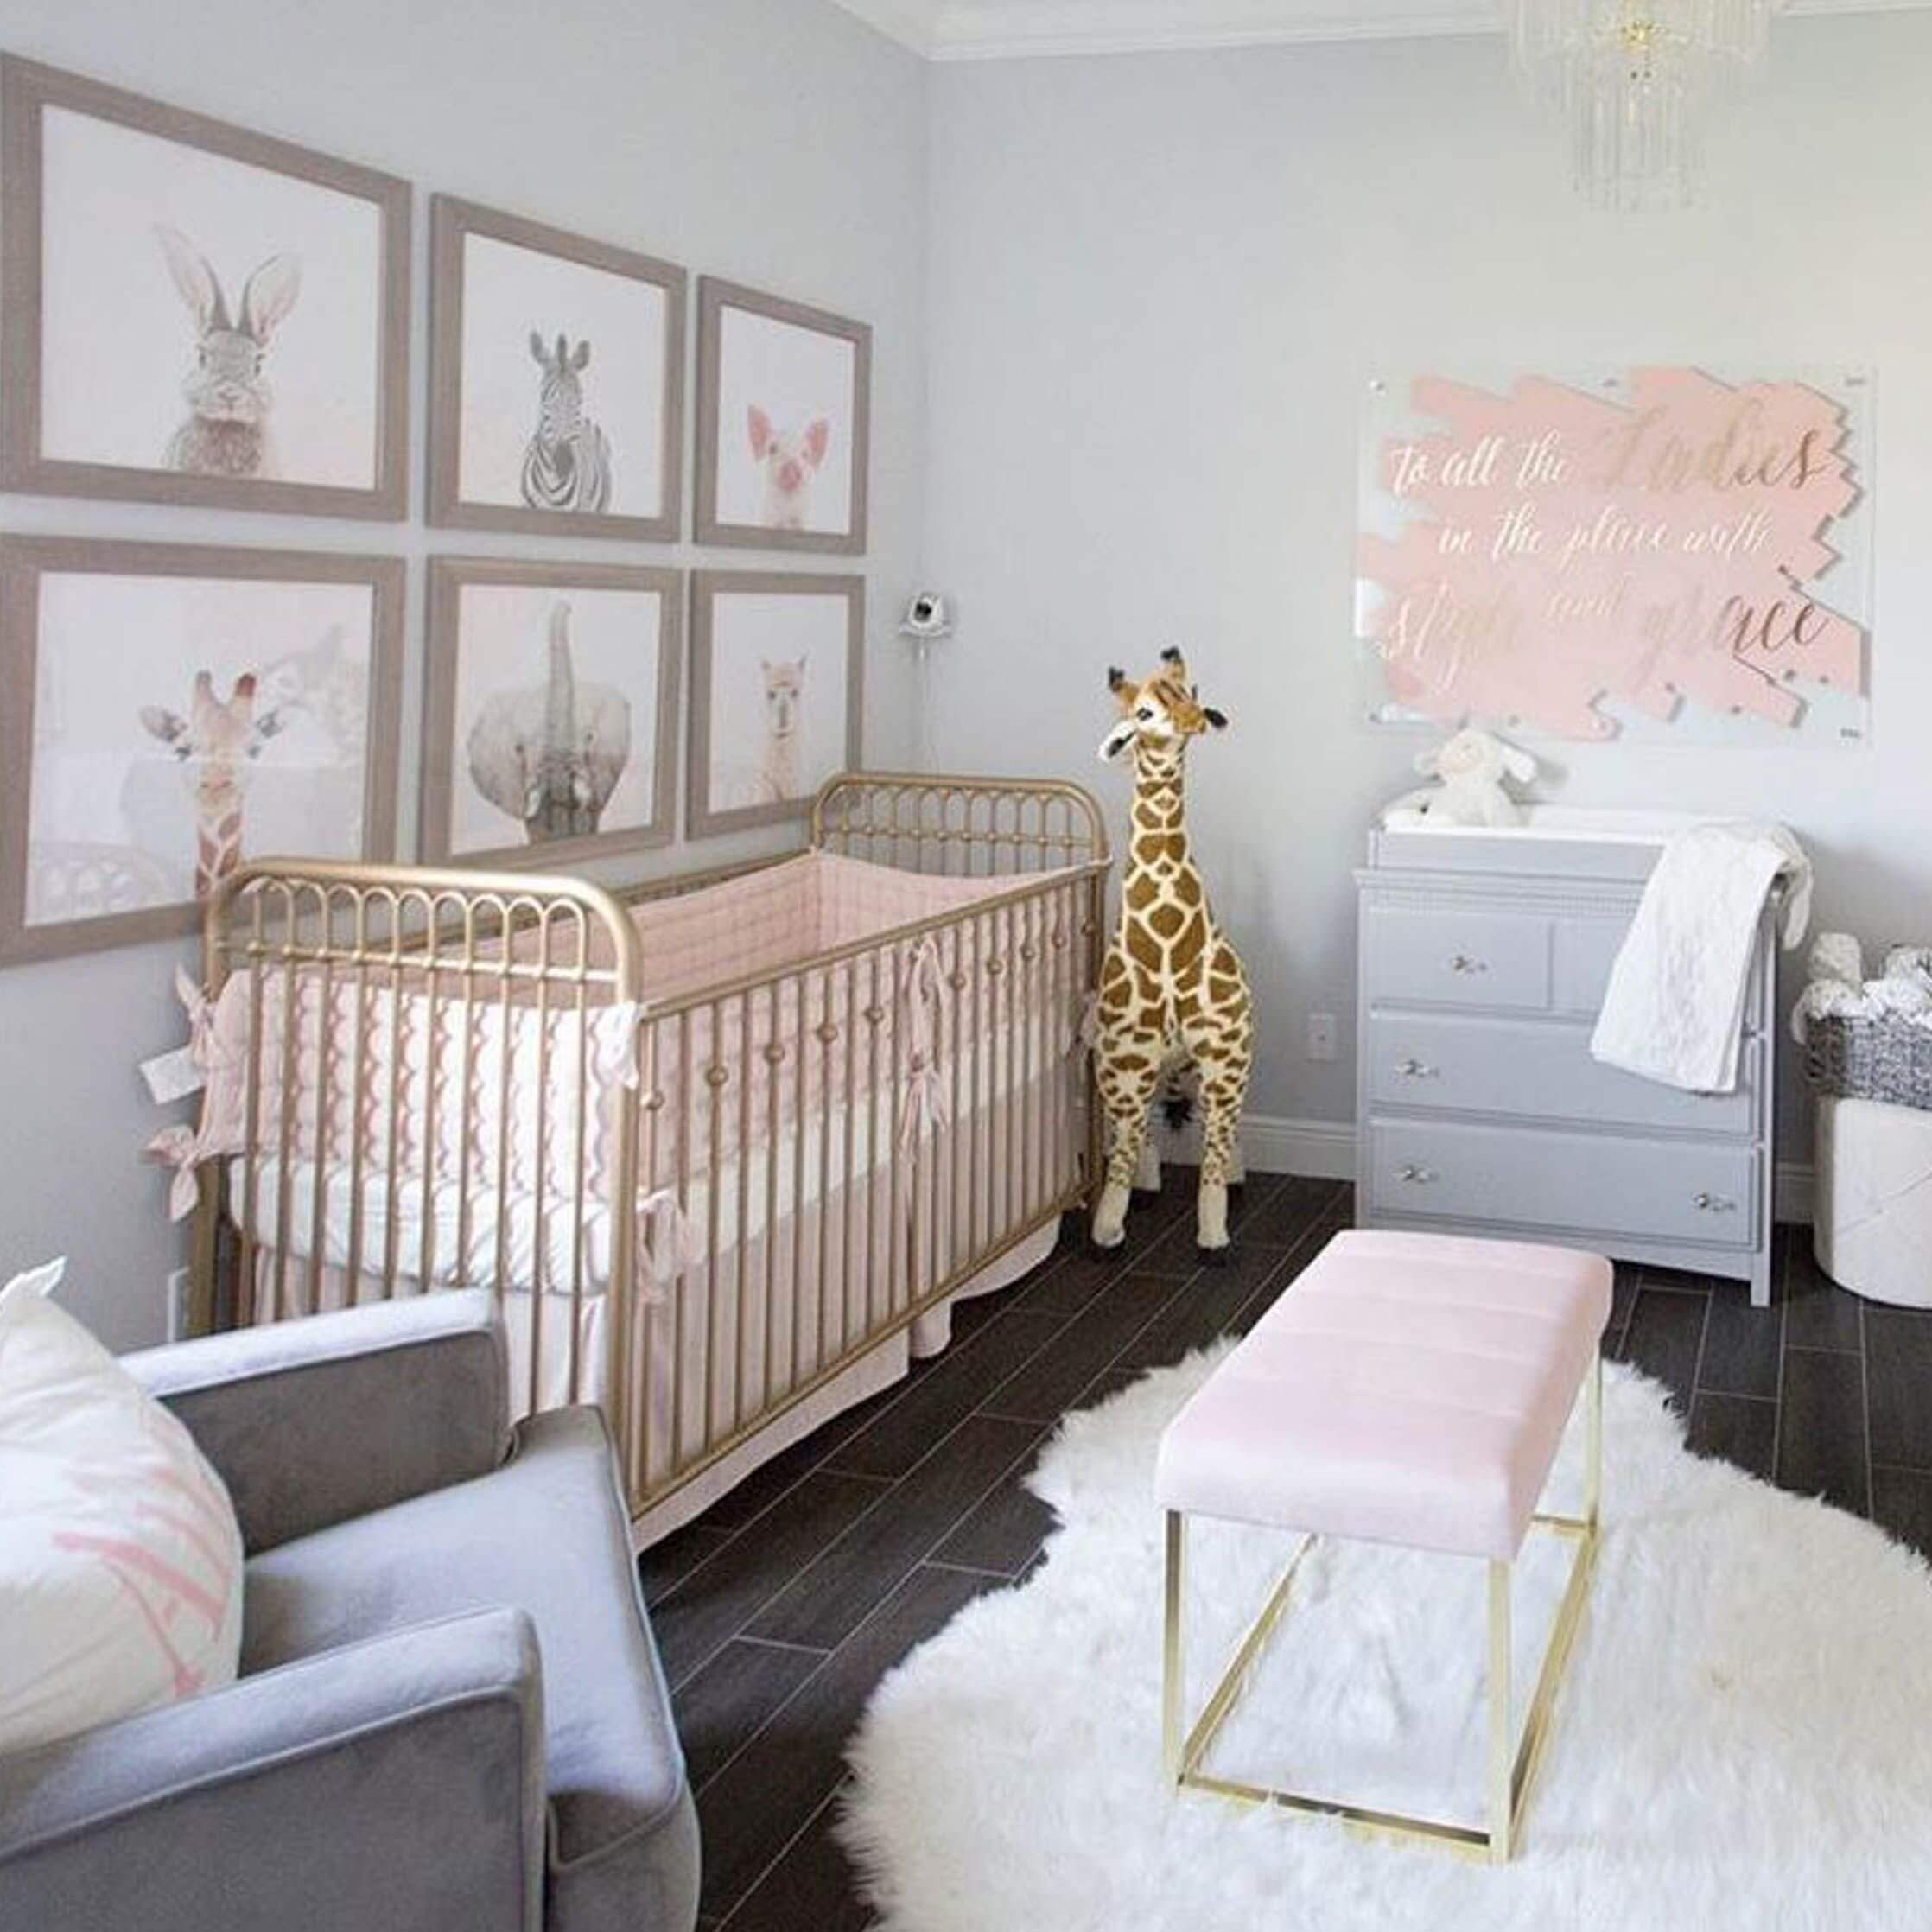 Baby Decor Rooms
 The Best Baby Boy Nursery With These Ideas